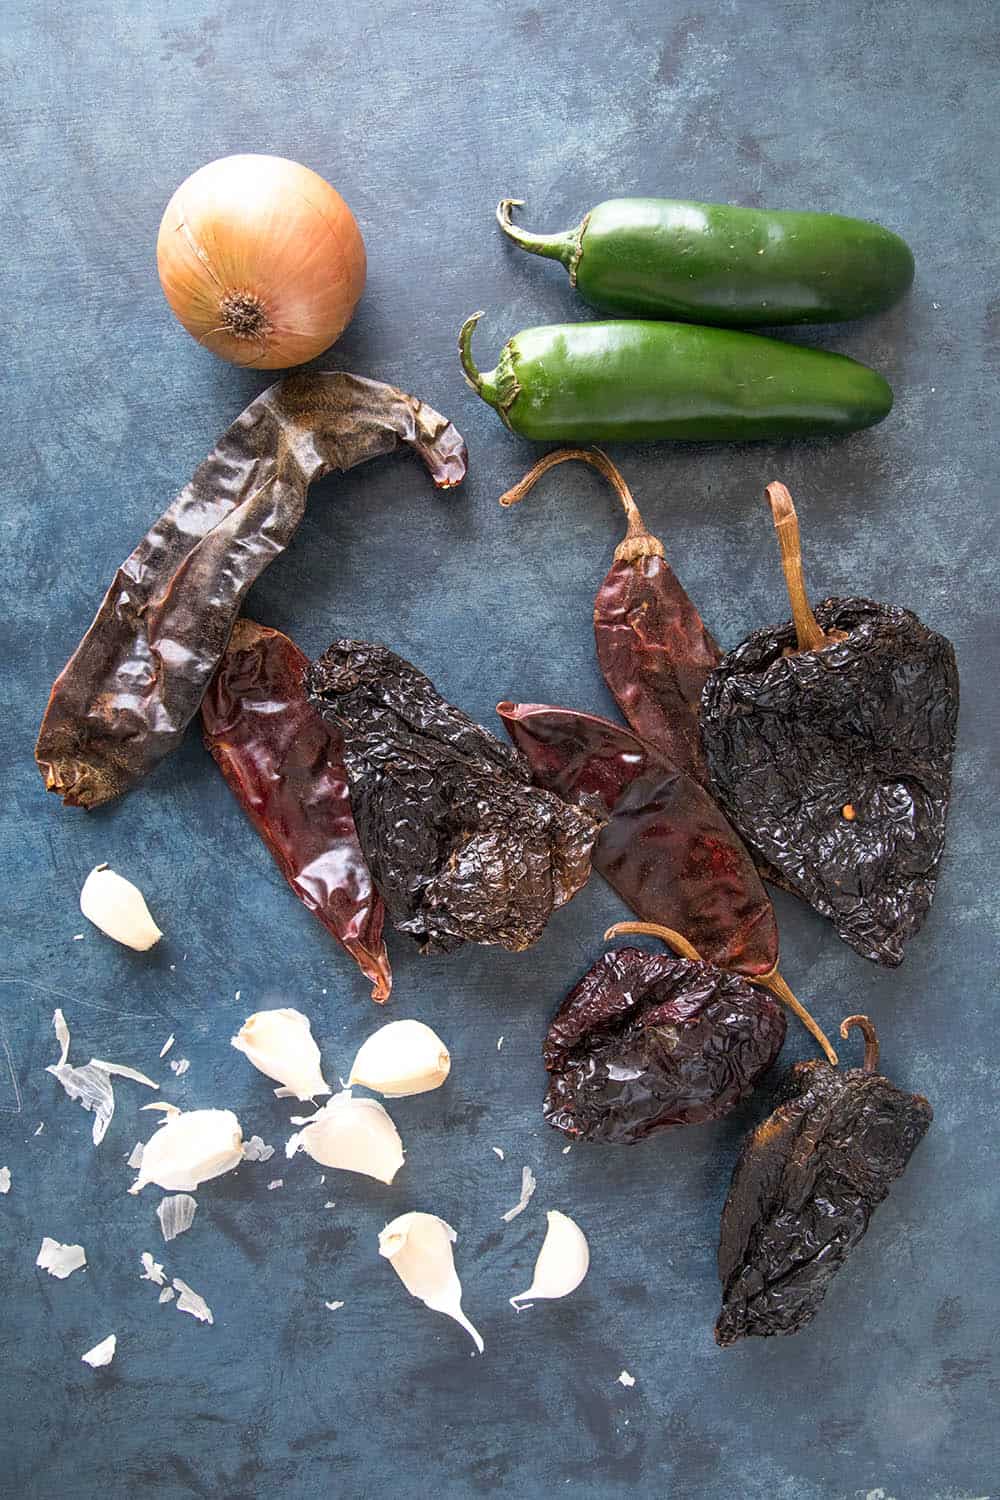 Dried peppers, jalapenos, onion and garlic, essential for making Chili Con Carne